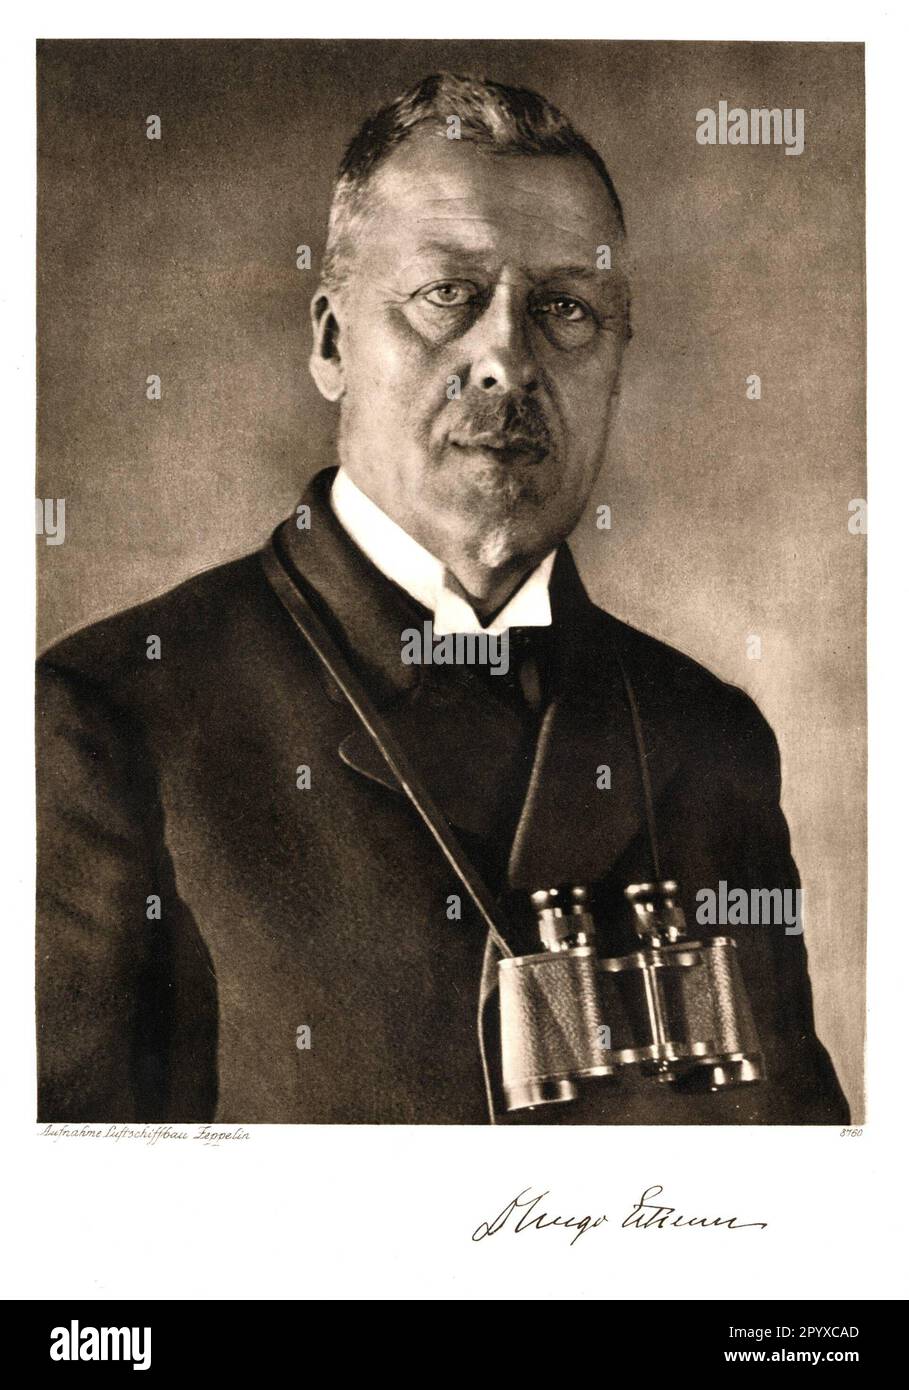 Dr. Hugo Eckener (1868-1954), German engineer and airship pioneer, chairman of the 'Luftschiffbau Zeppelin' society since April 1, 1924. In the same year he led the crossing of the Atlantic Ocean by the airship ZR III. Photograph of Luftschiffbau Zeppelin. Photo: Heliogravure, Corpus Imaginum, Hanfstaengl Collection. Undated photograph, probably late 1920s/early 1930s. [automated translation] Stock Photo